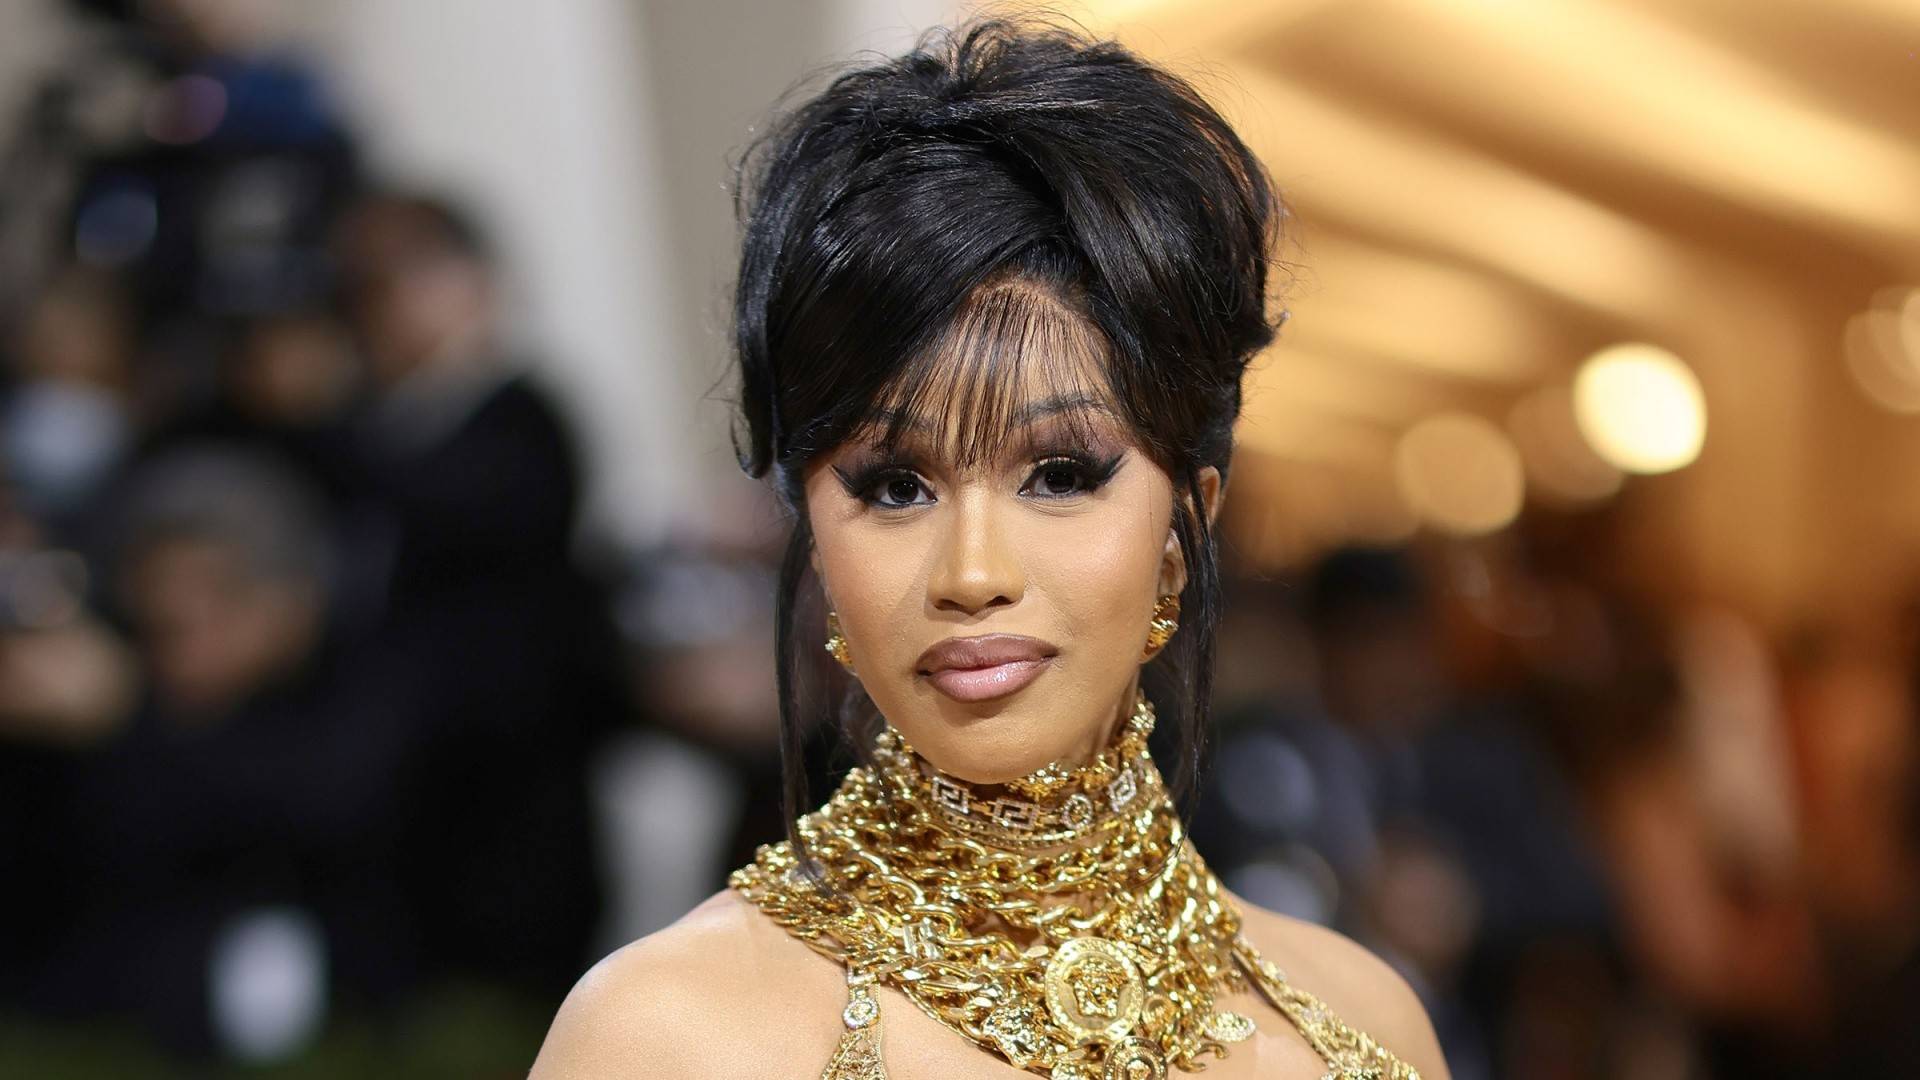 Cardi B and Megan Thee Stallion's 90s Updo Hairstyle Trend